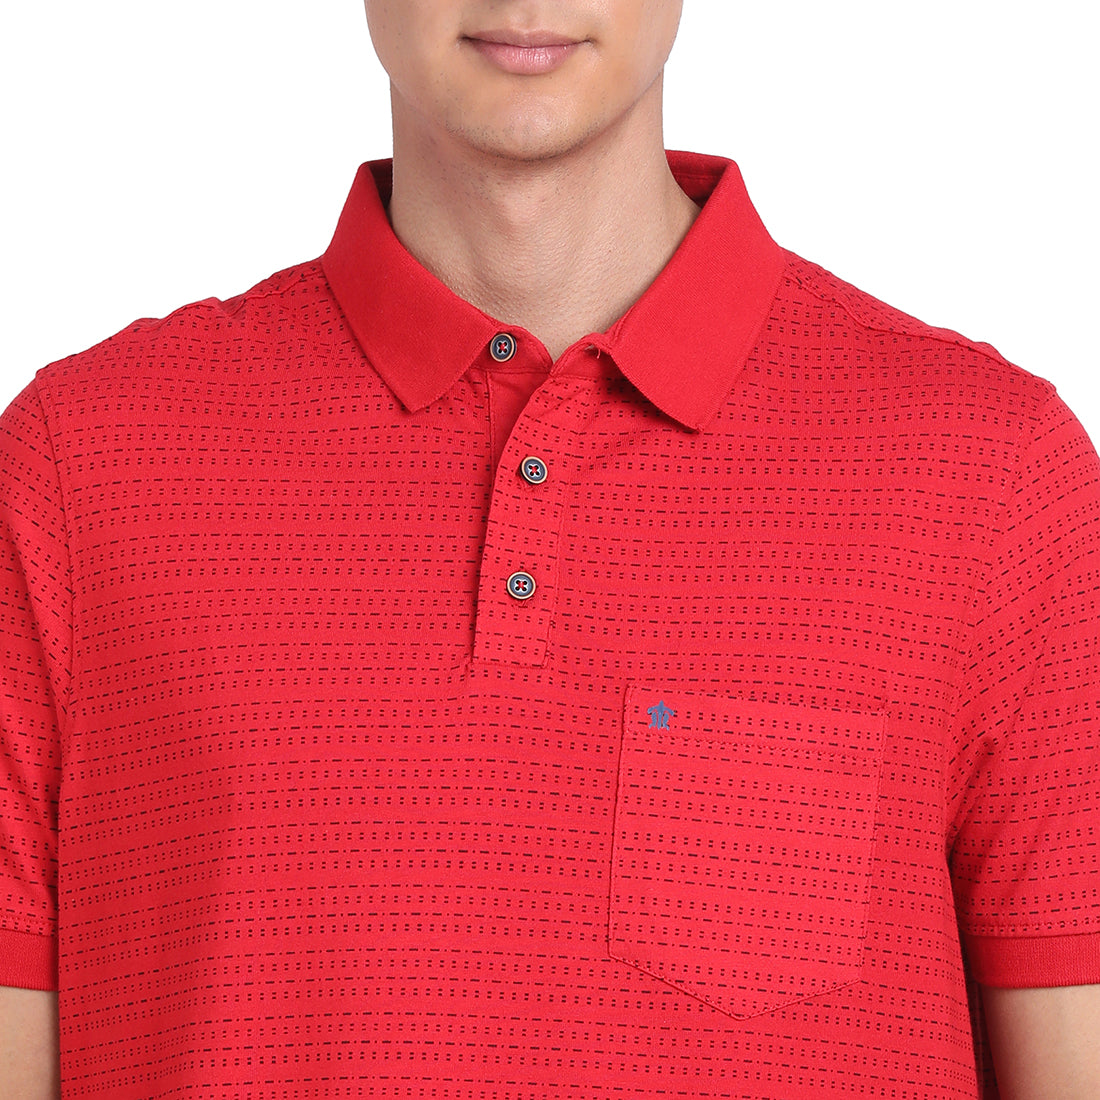 100% Cotton Red Dobby Polo Neck Half Sleeve Casual T-Shirt